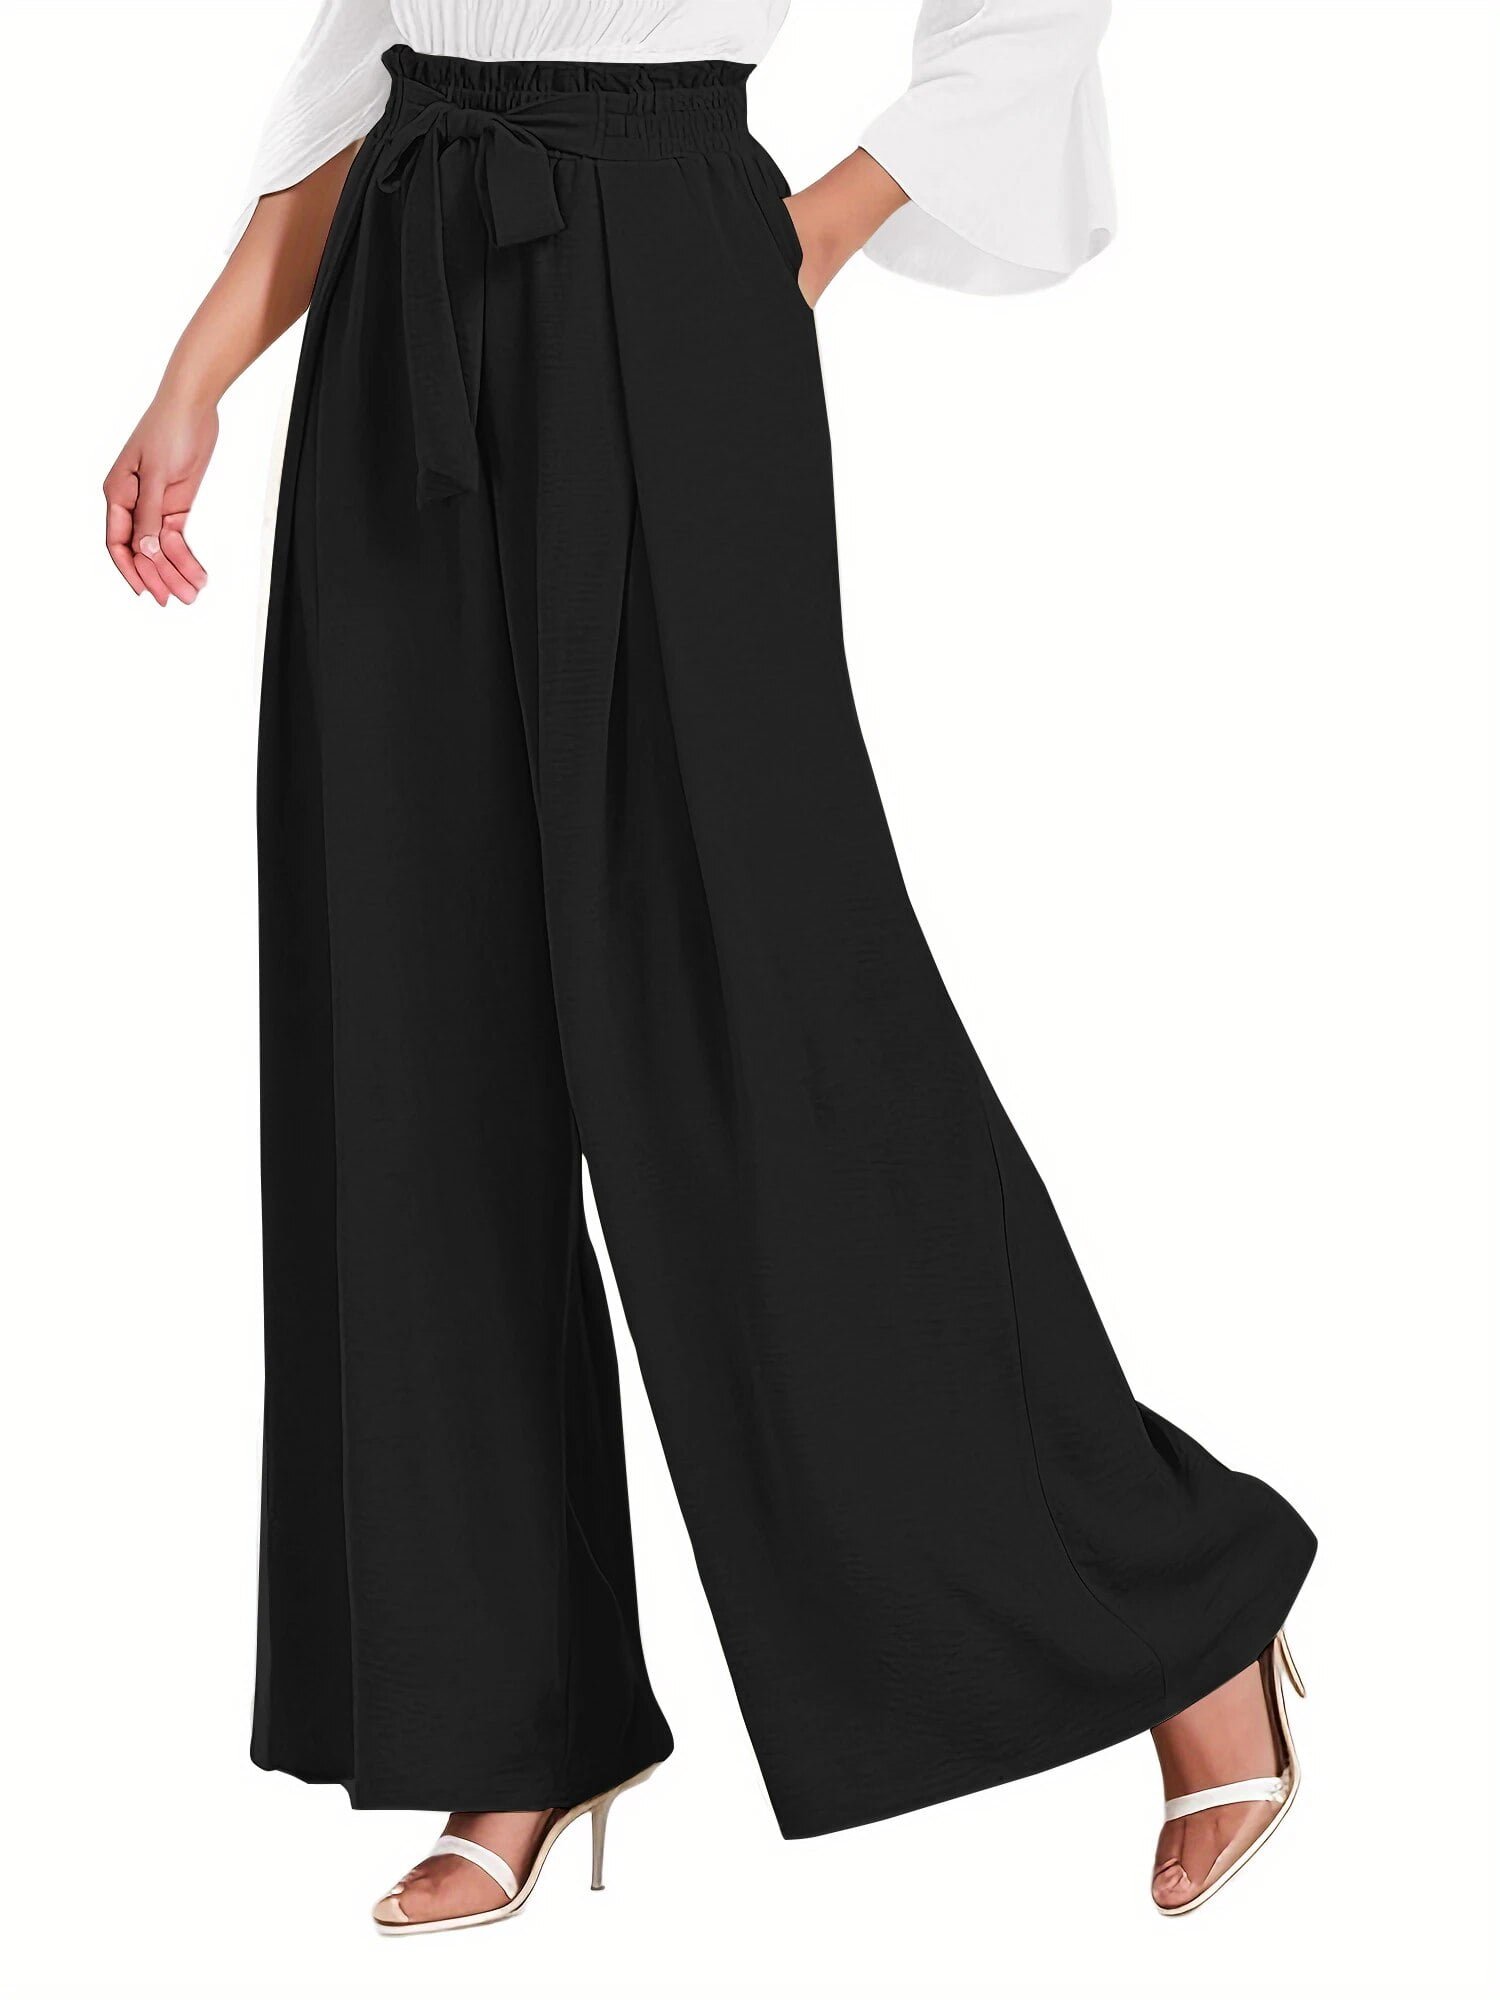 Gumipy Wide Leg Pants for Women High Waisted Crepe Pleated Pants